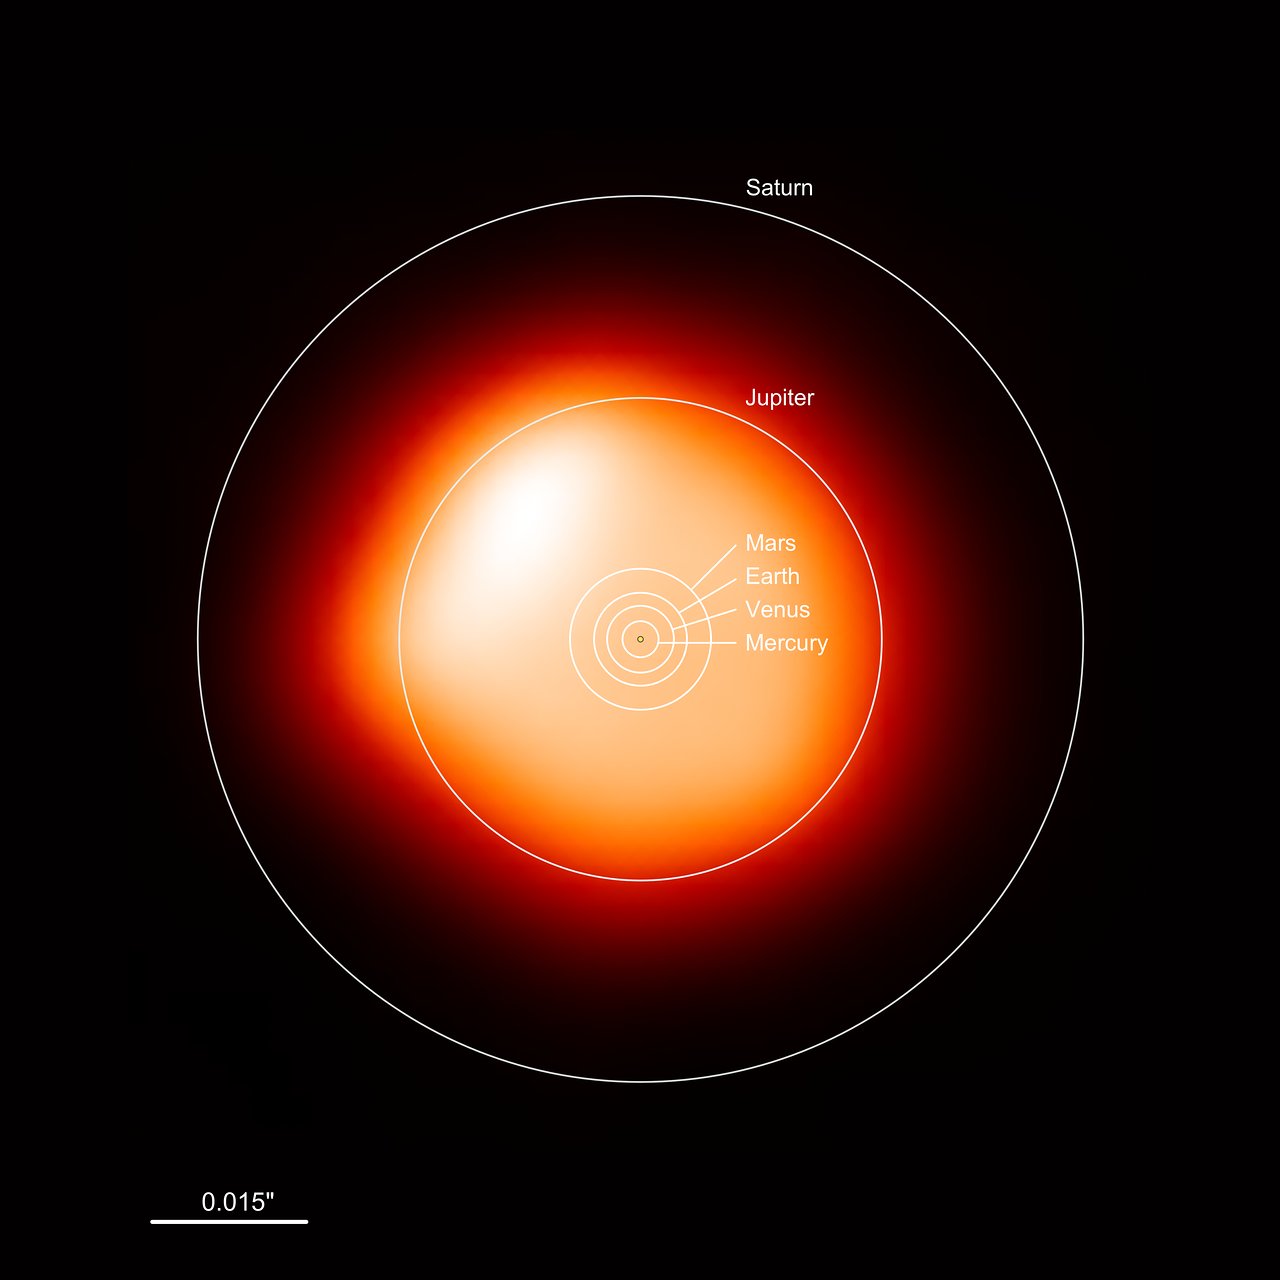 Big red blobby star image, with orbits of solar system planets overlaid.